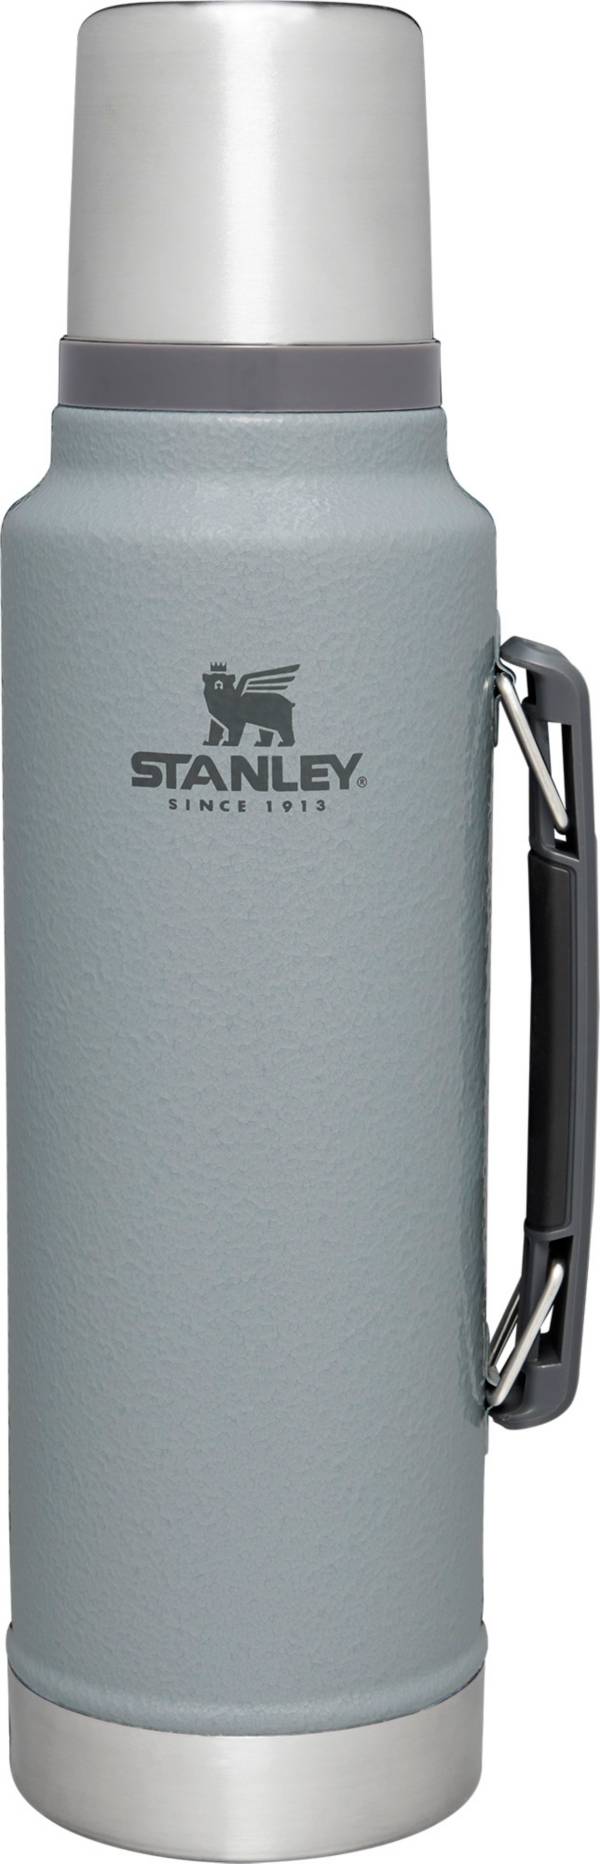 Promotional Stanley® 1.5 qt Classic Vacuum Insulated Bottle $61.73